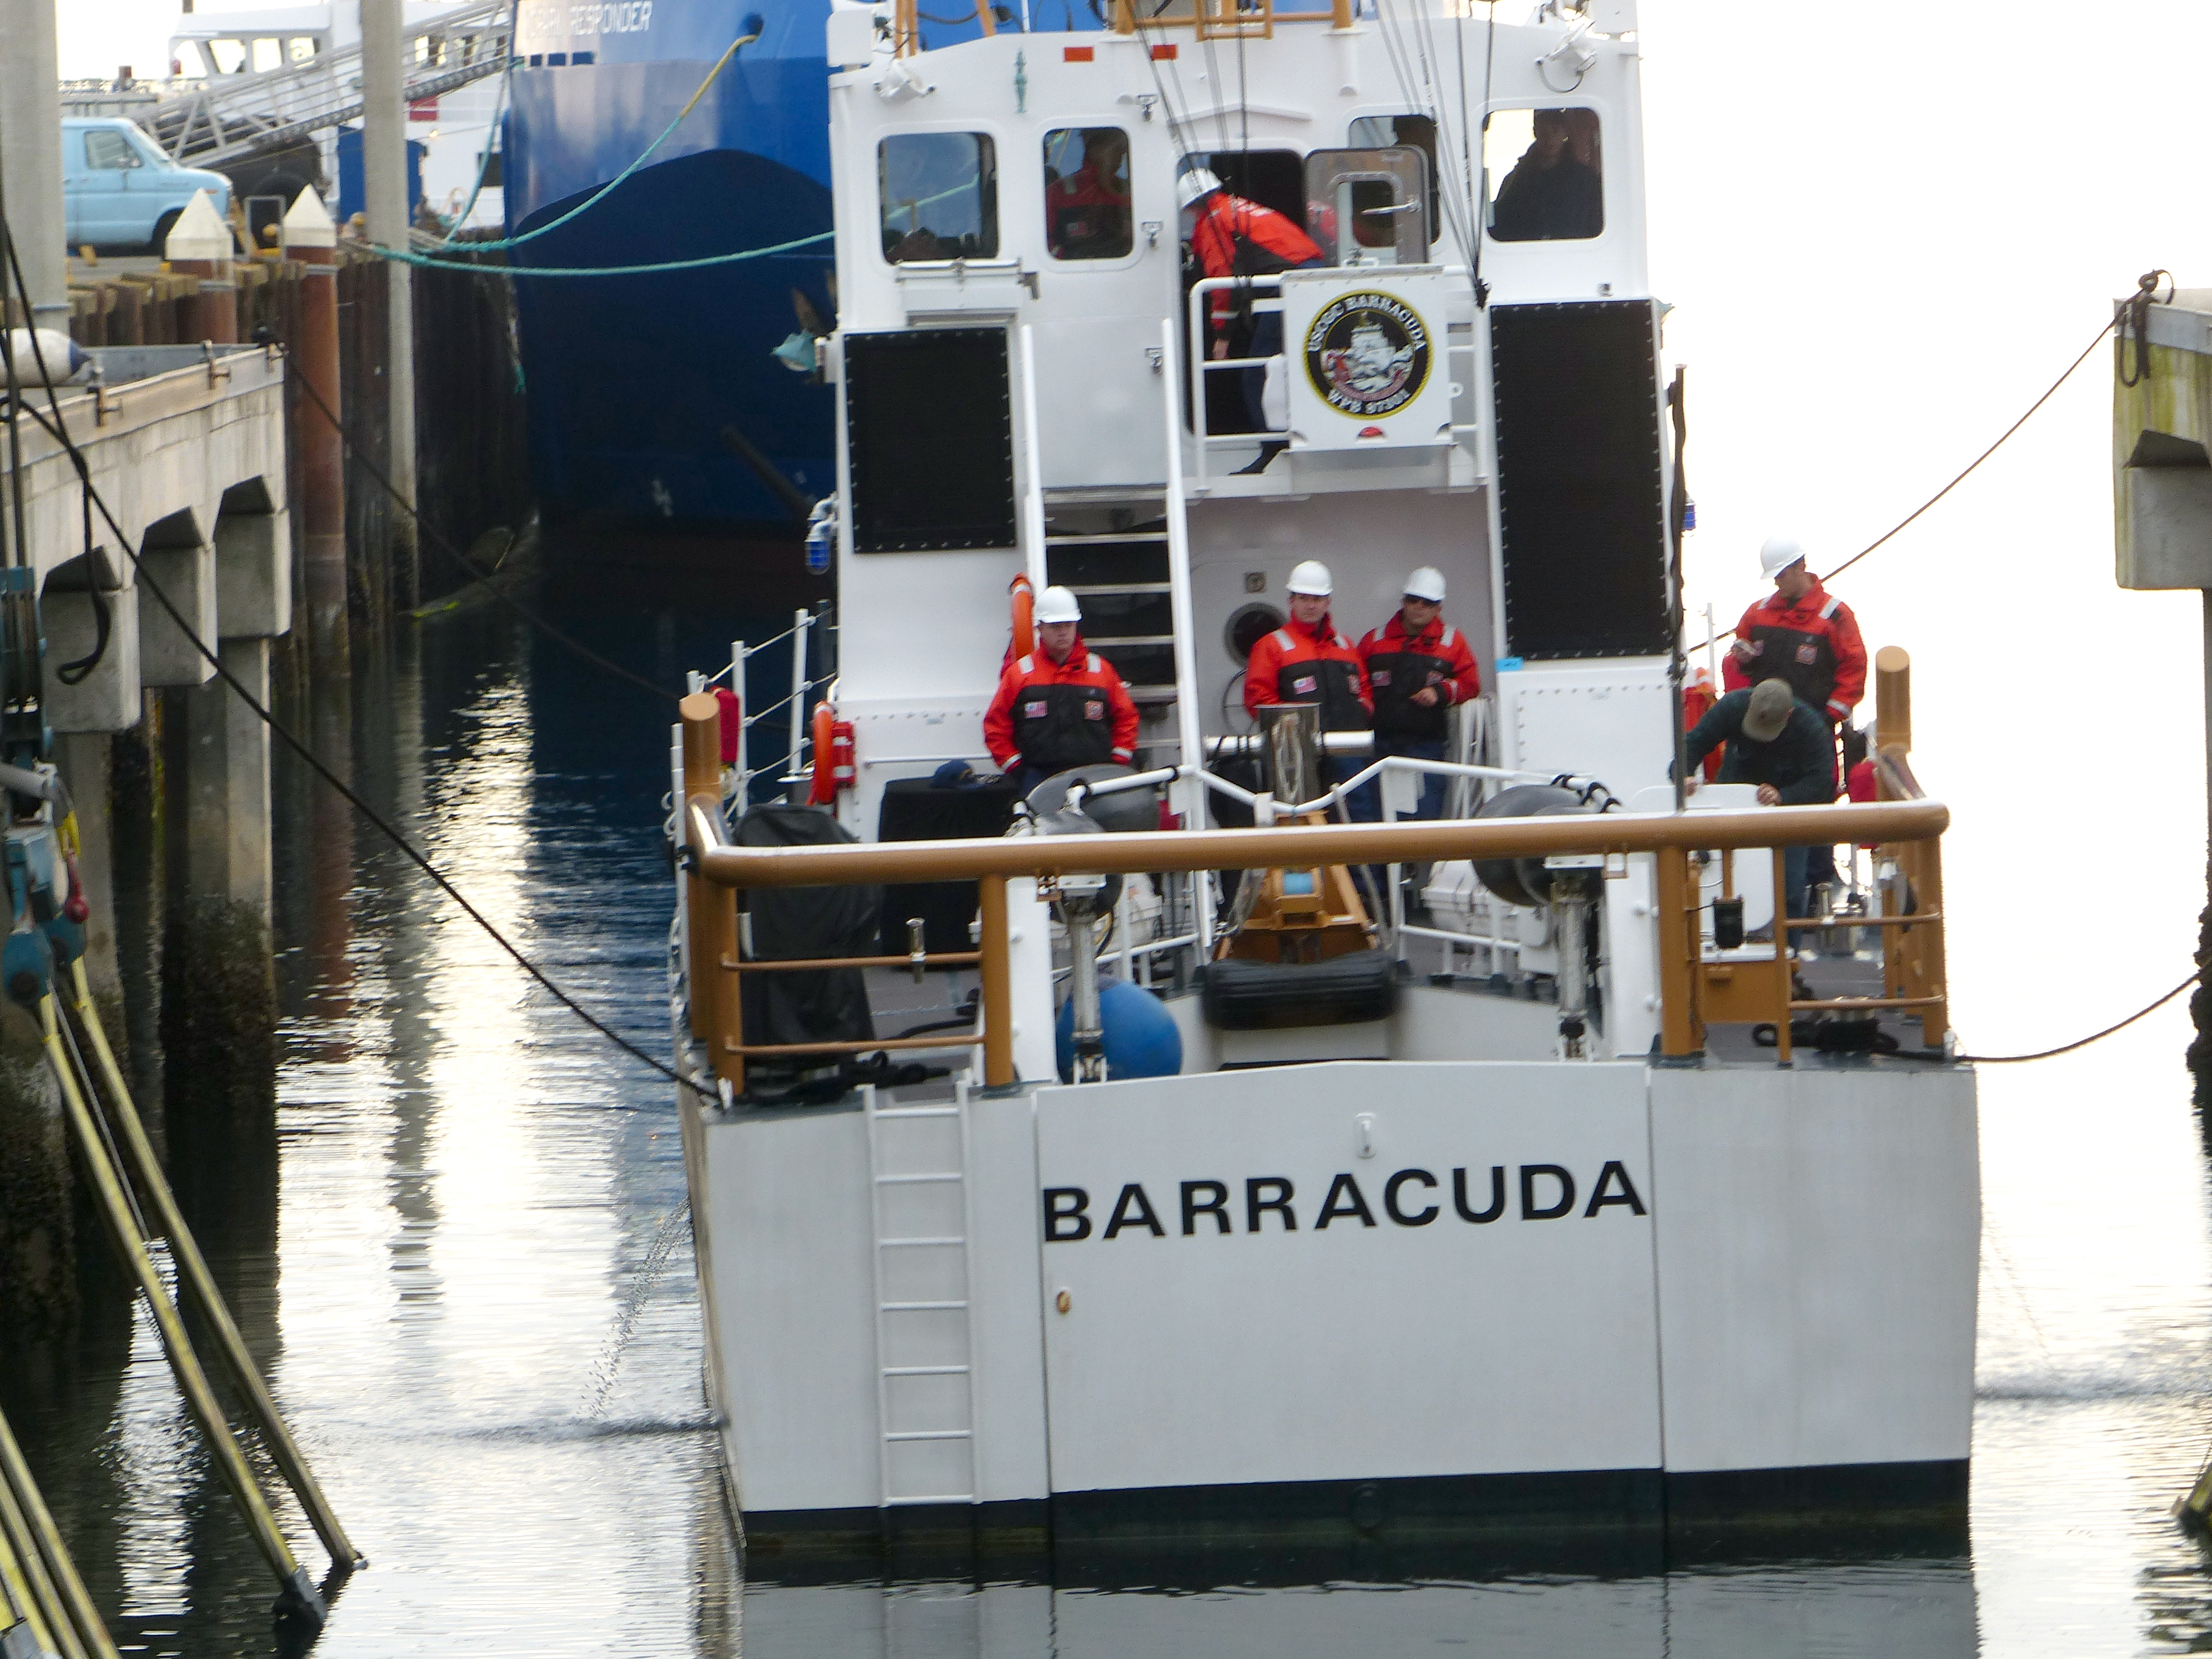 The Coast Guard Marine Protector class patrol boat Barracuda is prepared to be hoisted out of the water. (David G. Sellars/for Peninsula Daily News)